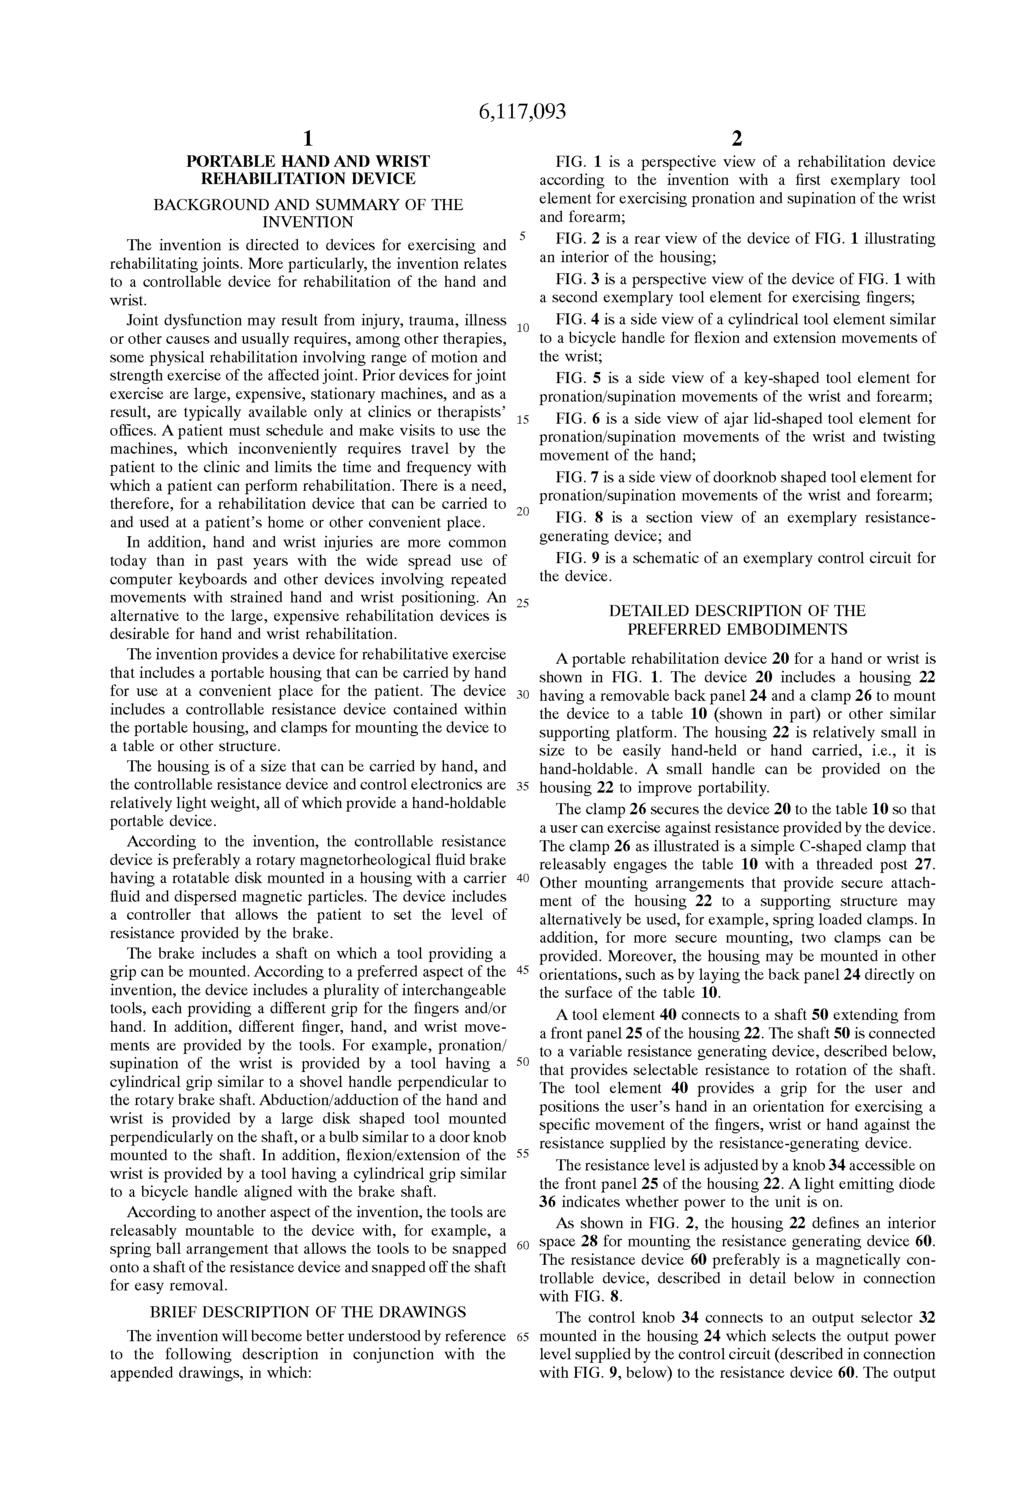 1 PORTABLE HAND AND WRIST REHABILITATION DEVICE BACKGROUND AND SUMMARY OF THE INVENTION The invention is directed to devices for exercising and rehabilitating joints.